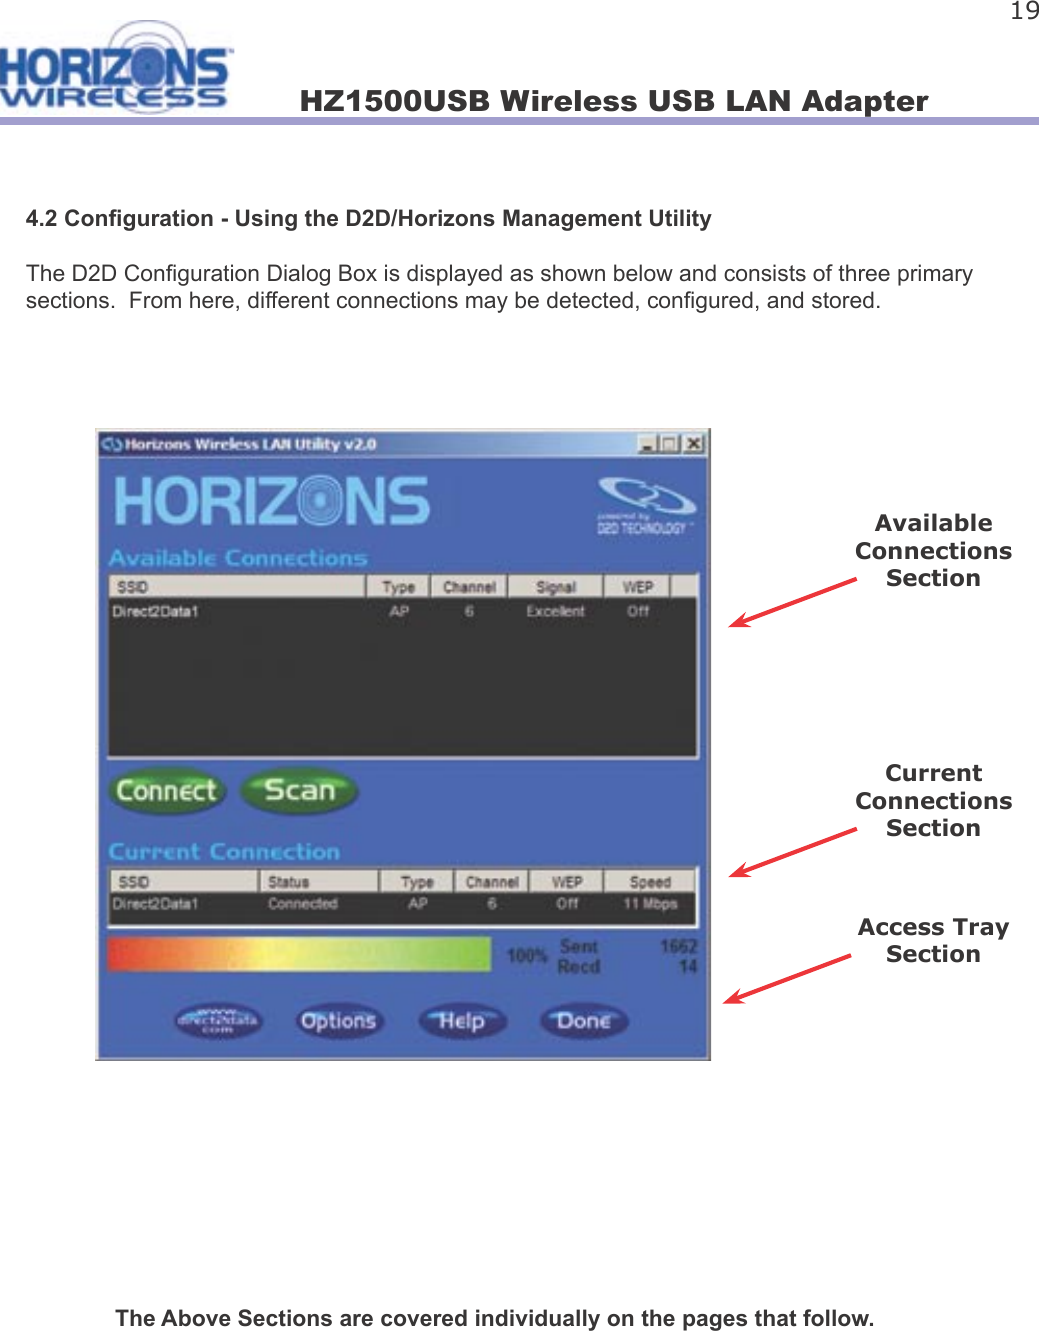 HZ1500USB Wireless USB LAN Adapter 194.2 Con guration - Using the D2D/Horizons Management UtilityThe D2D Con guration Dialog Box is displayed as shown below and consists of three primary sections.  From here, different connections may be detected, con gured, and stored.                    The Above Sections are covered individually on the pages that follow. Available Connections SectionCurrent Connections SectionAccess Tray Section